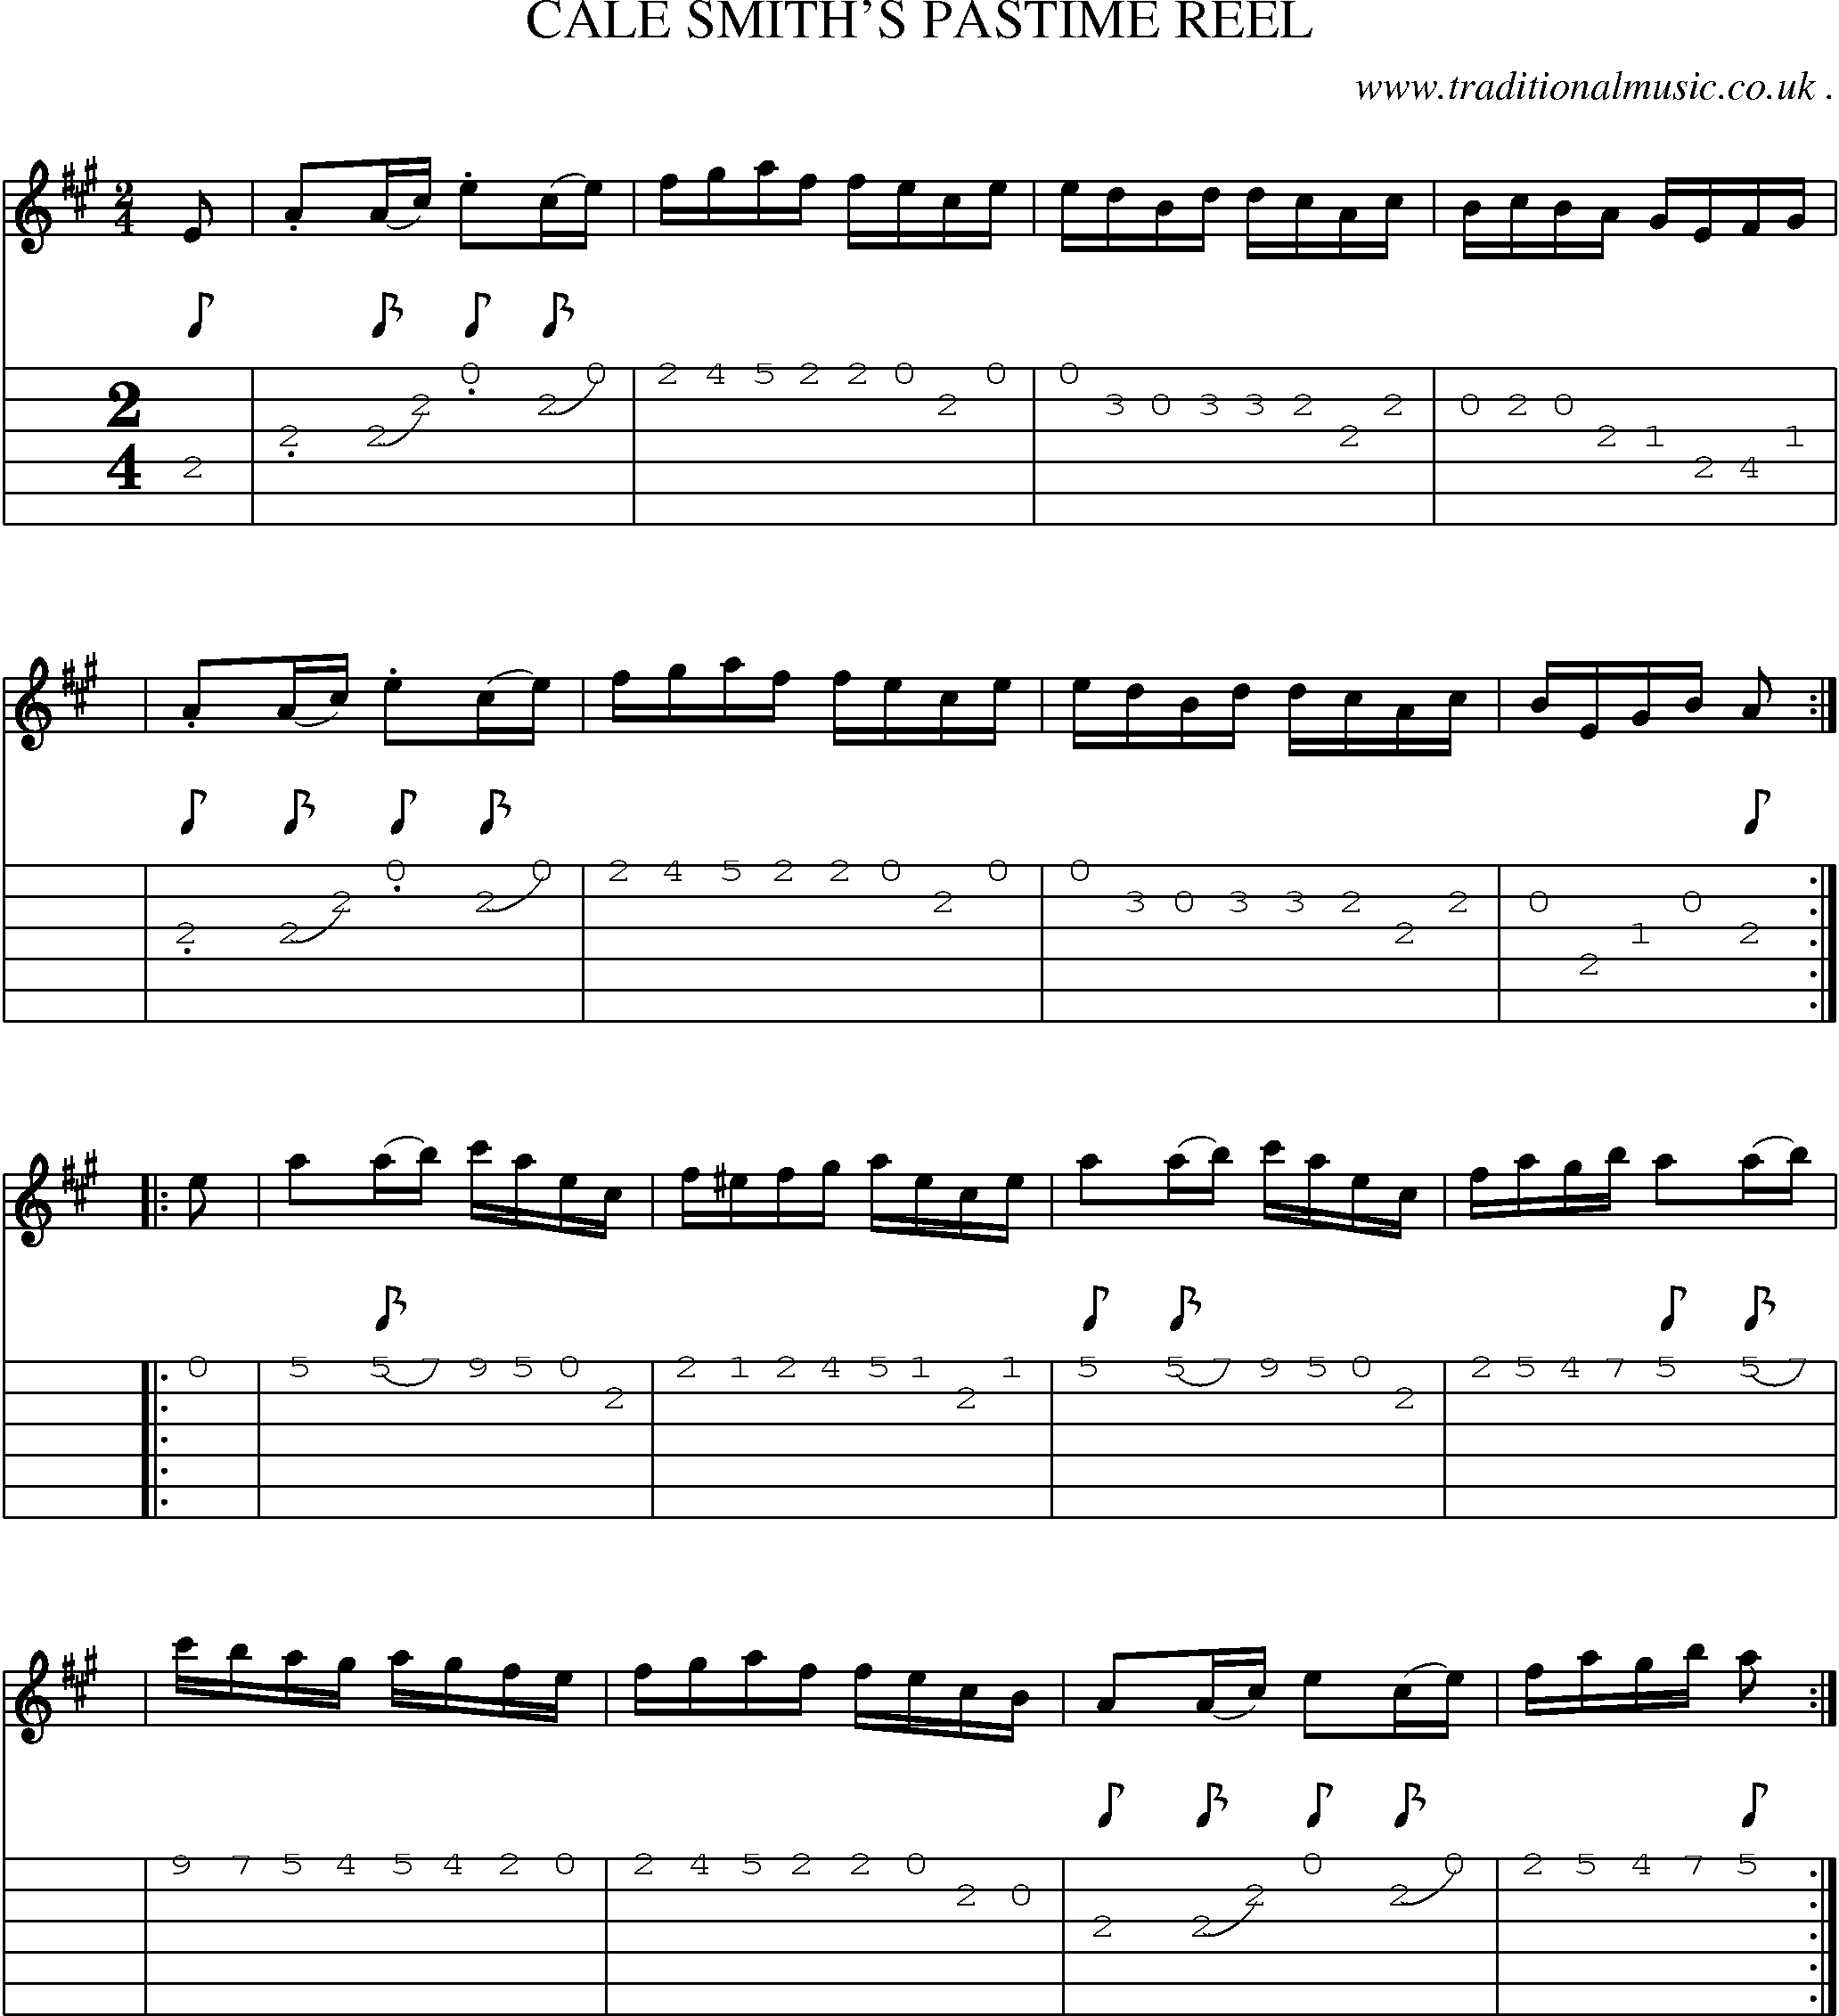 Sheet-Music and Guitar Tabs for Cale Smiths Pastime Reel